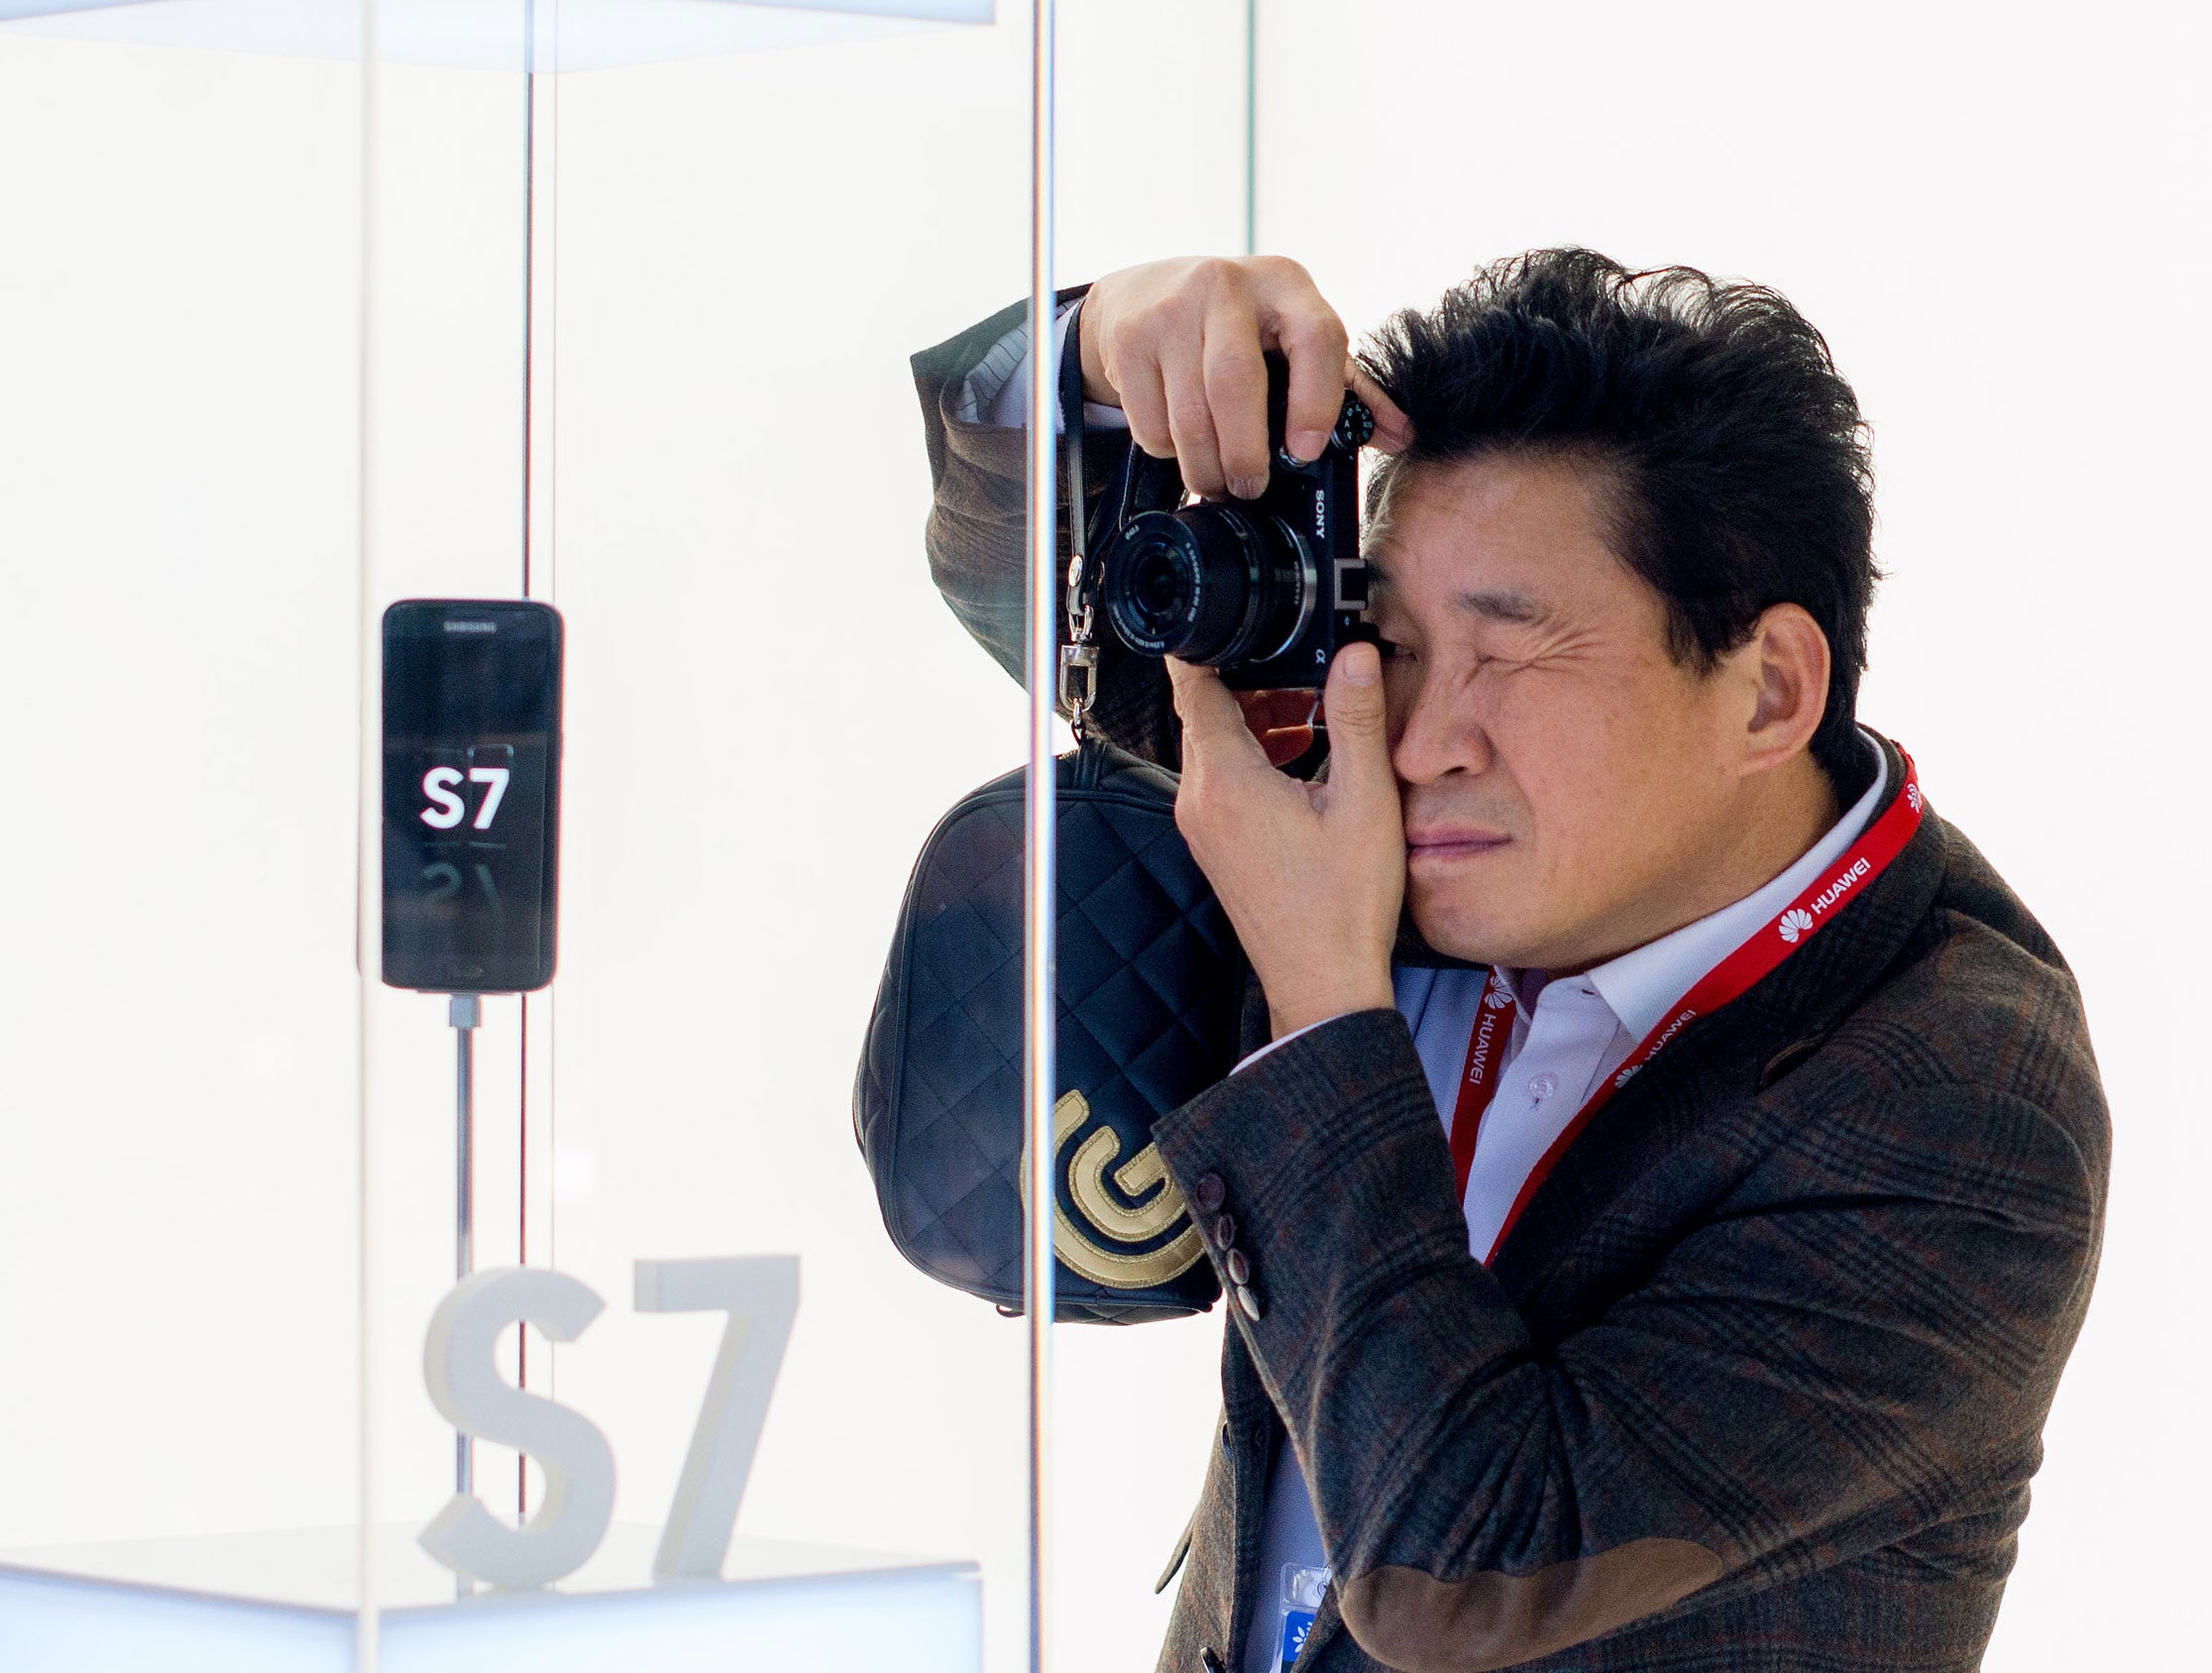 A man takes a picture of the Samsung Galaxy S7 at Mobile World Congress